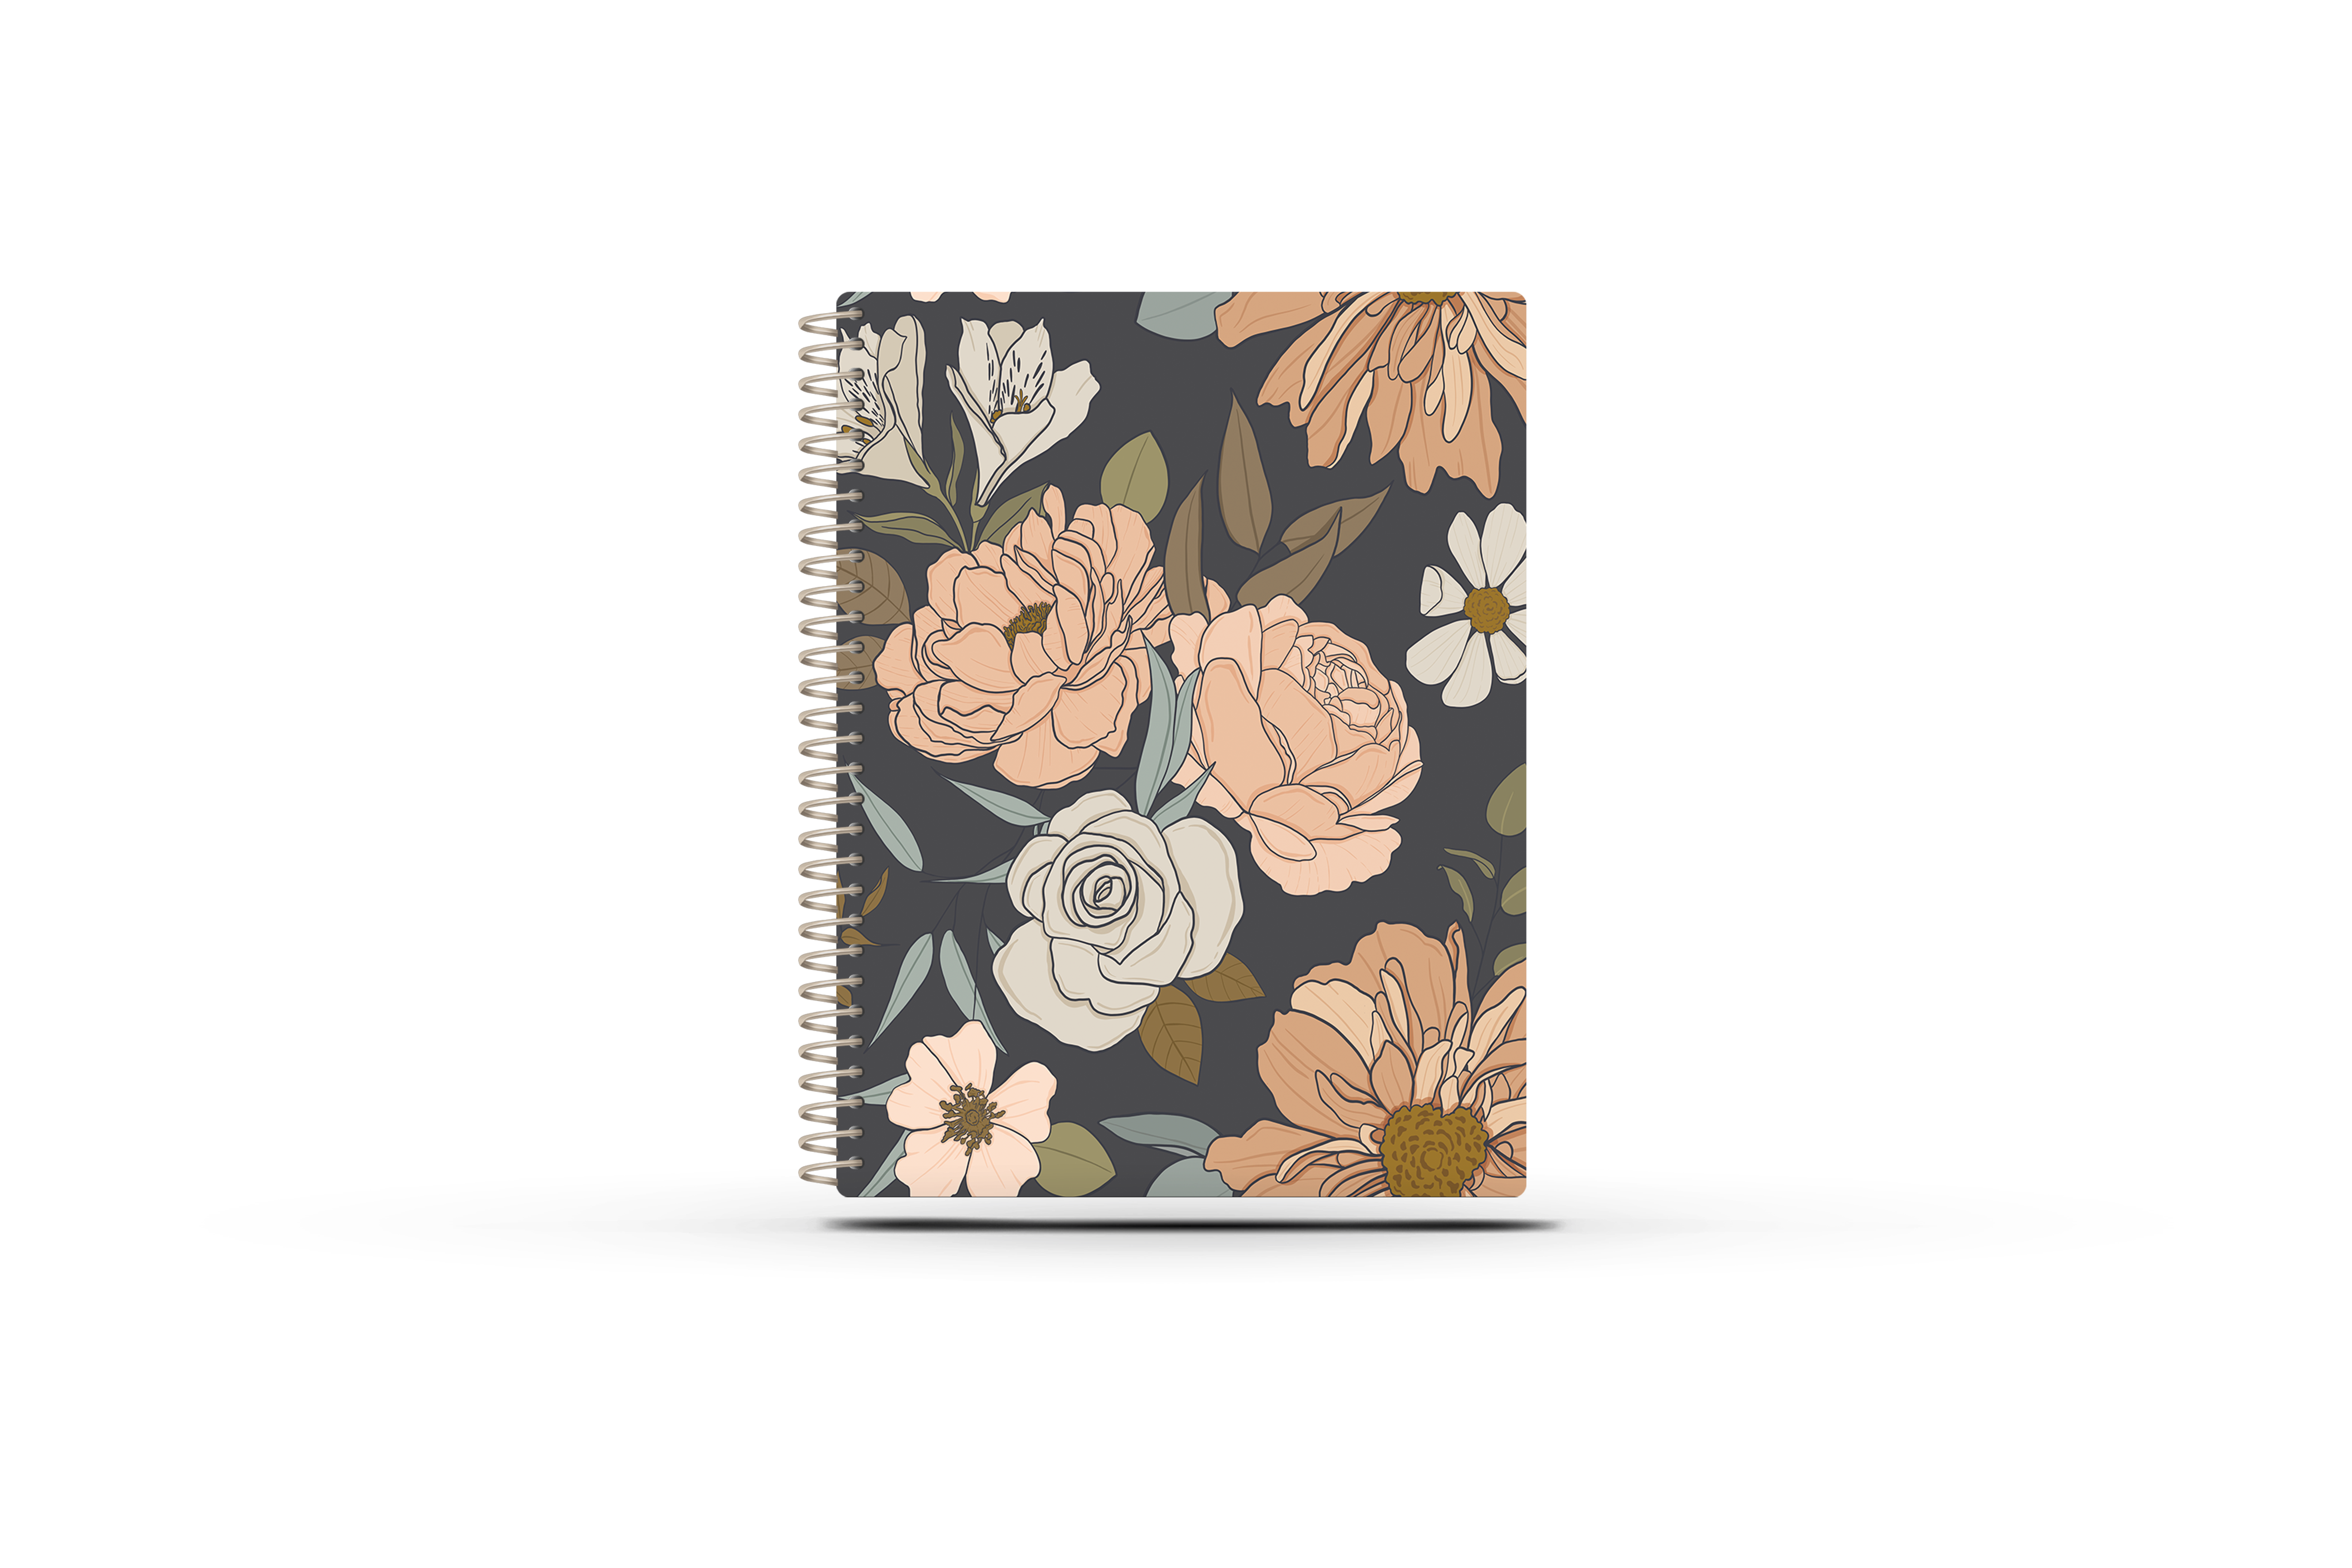 Sales Tracker Appointment Book - CLAIRE FLORAL